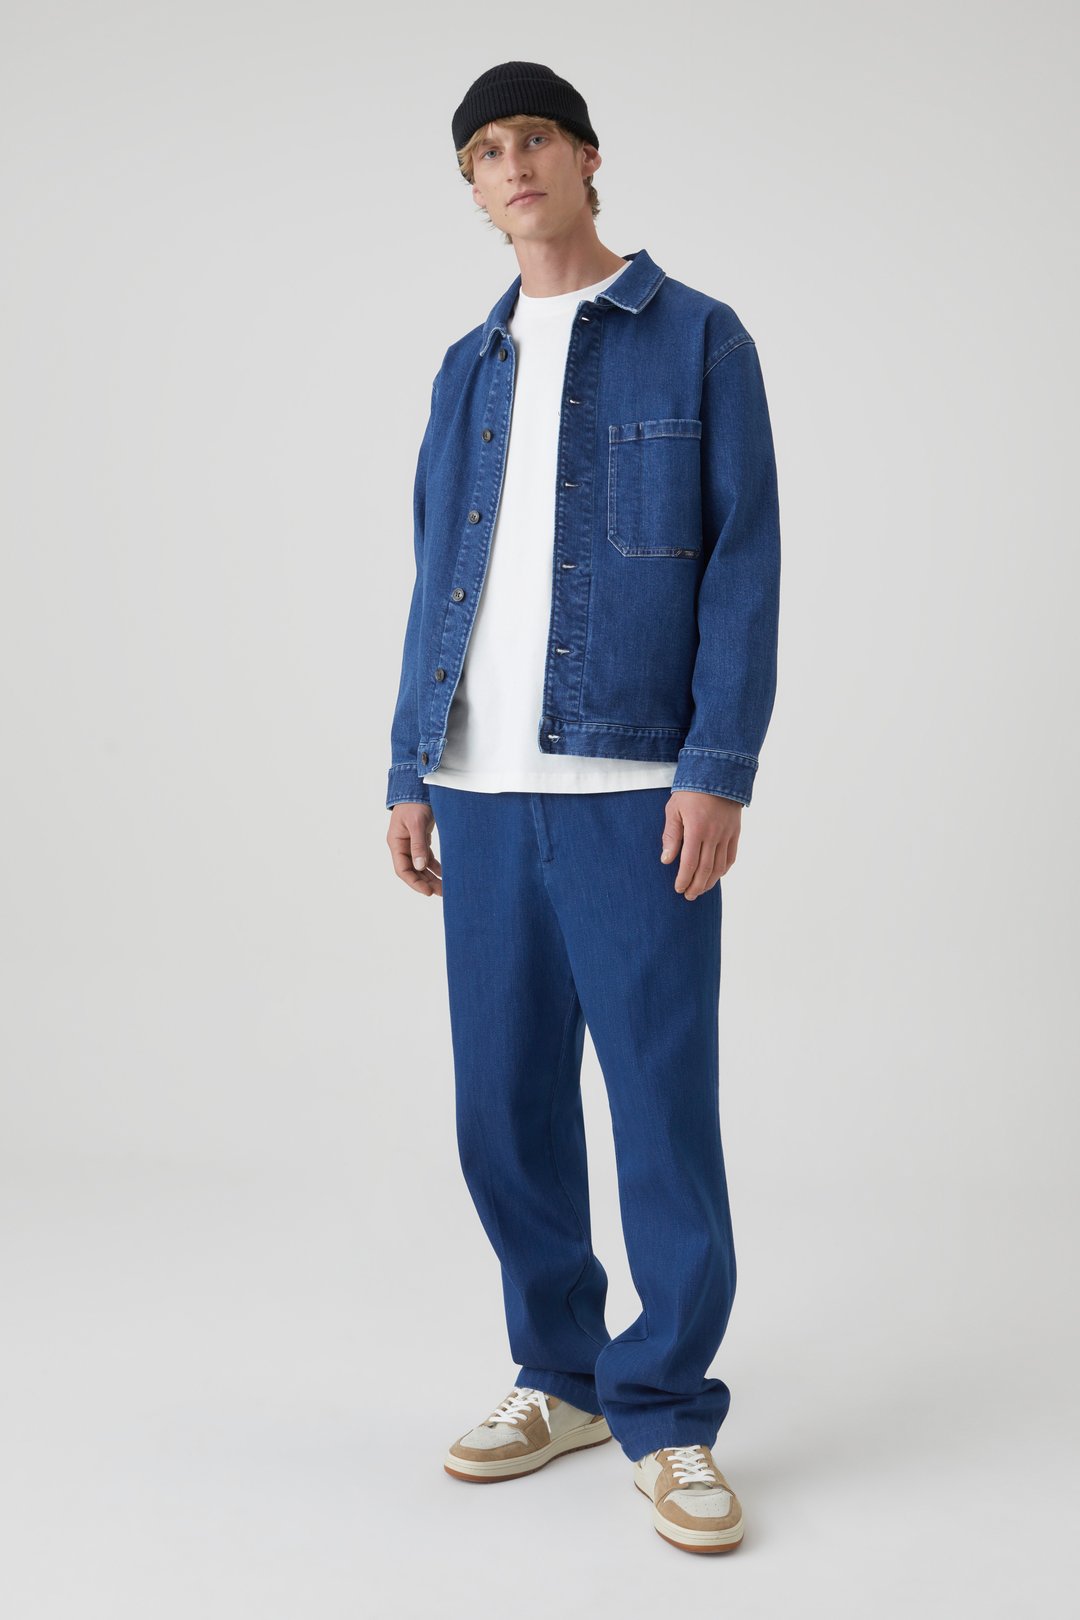 A BETTER BLUE WORKER JACKET | CLOSED